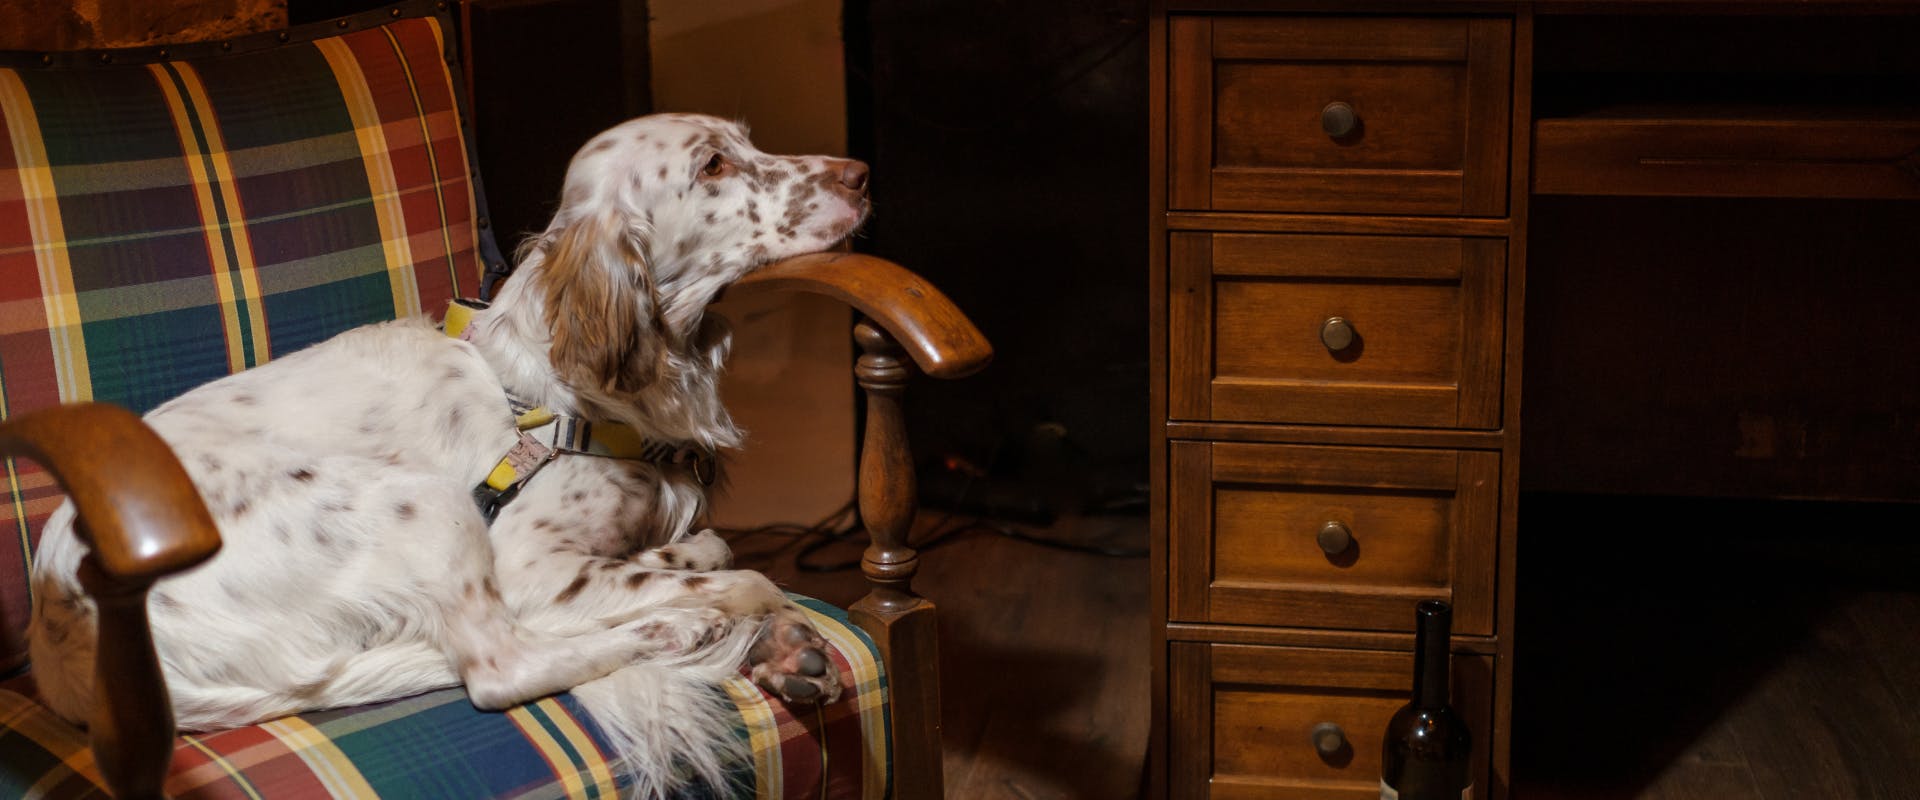 A dog rests its head on an arm chair.